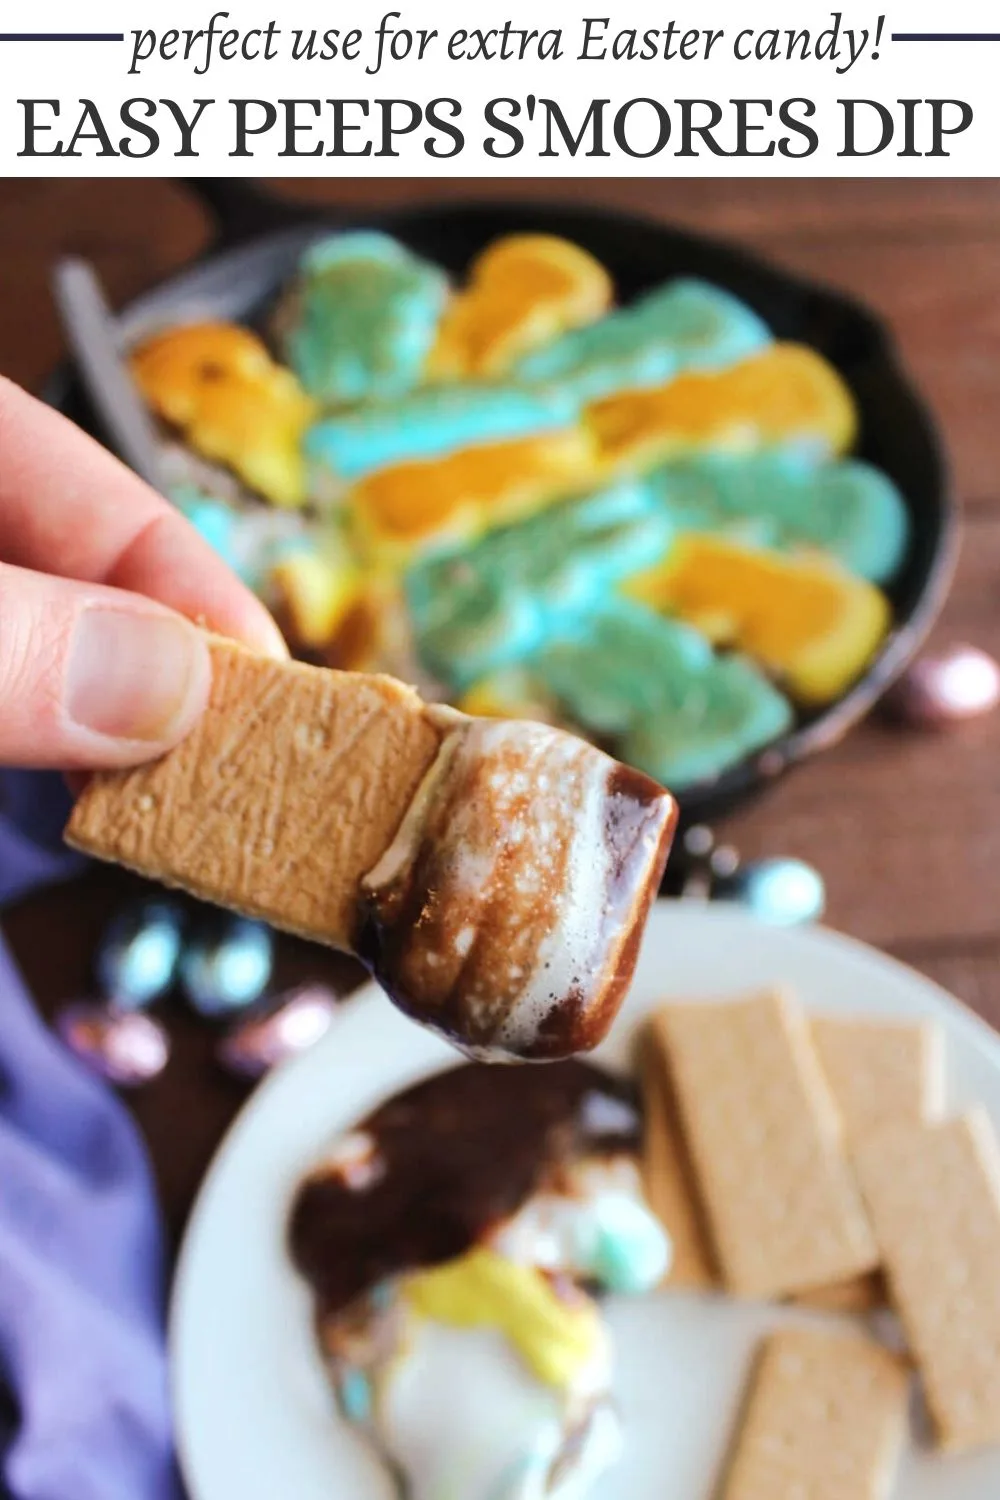 This Peeps s'mores dip is a perfect way to put that extra Easter candy to good use. The melty chocolate and gooey marshmallows are just begging for you to dig in with graham crackers.